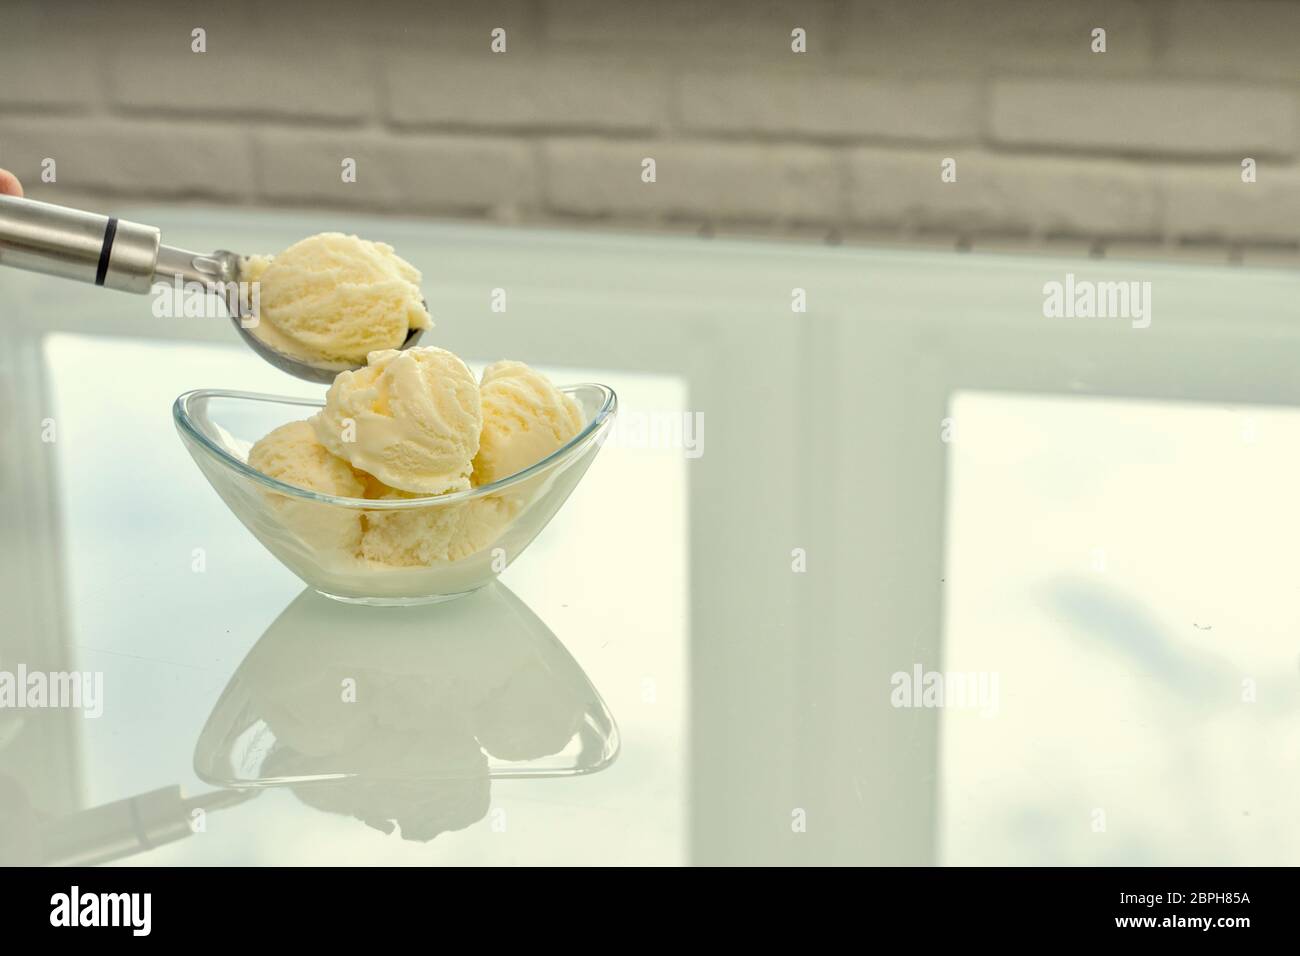 a bowl with vanilla ice cream stands on a reflective bright table. with a metal spoon report another 1 ball Stock Photo